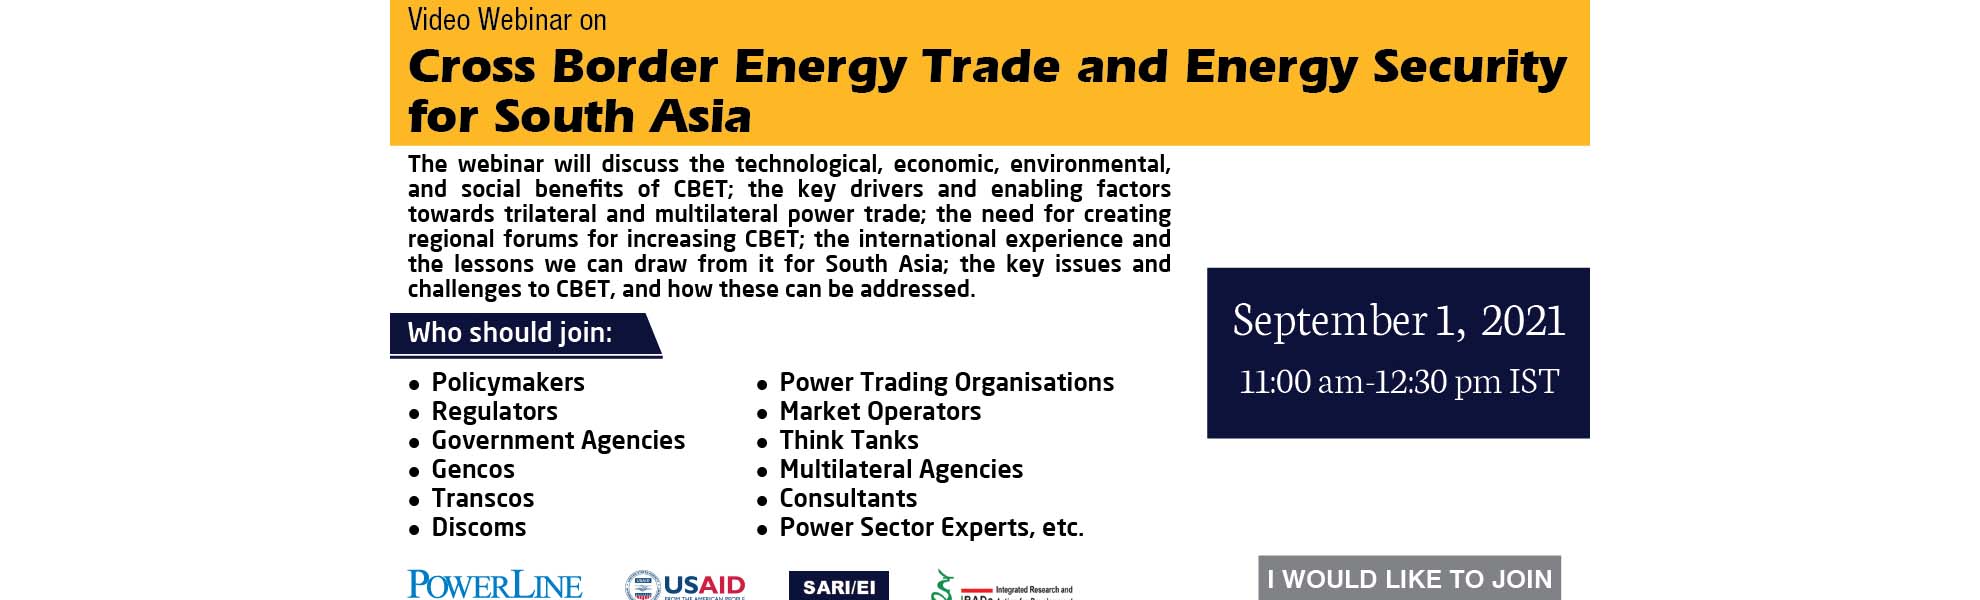 Webinar on “Cross Border Energy Trade and Energy Security for South Asia”